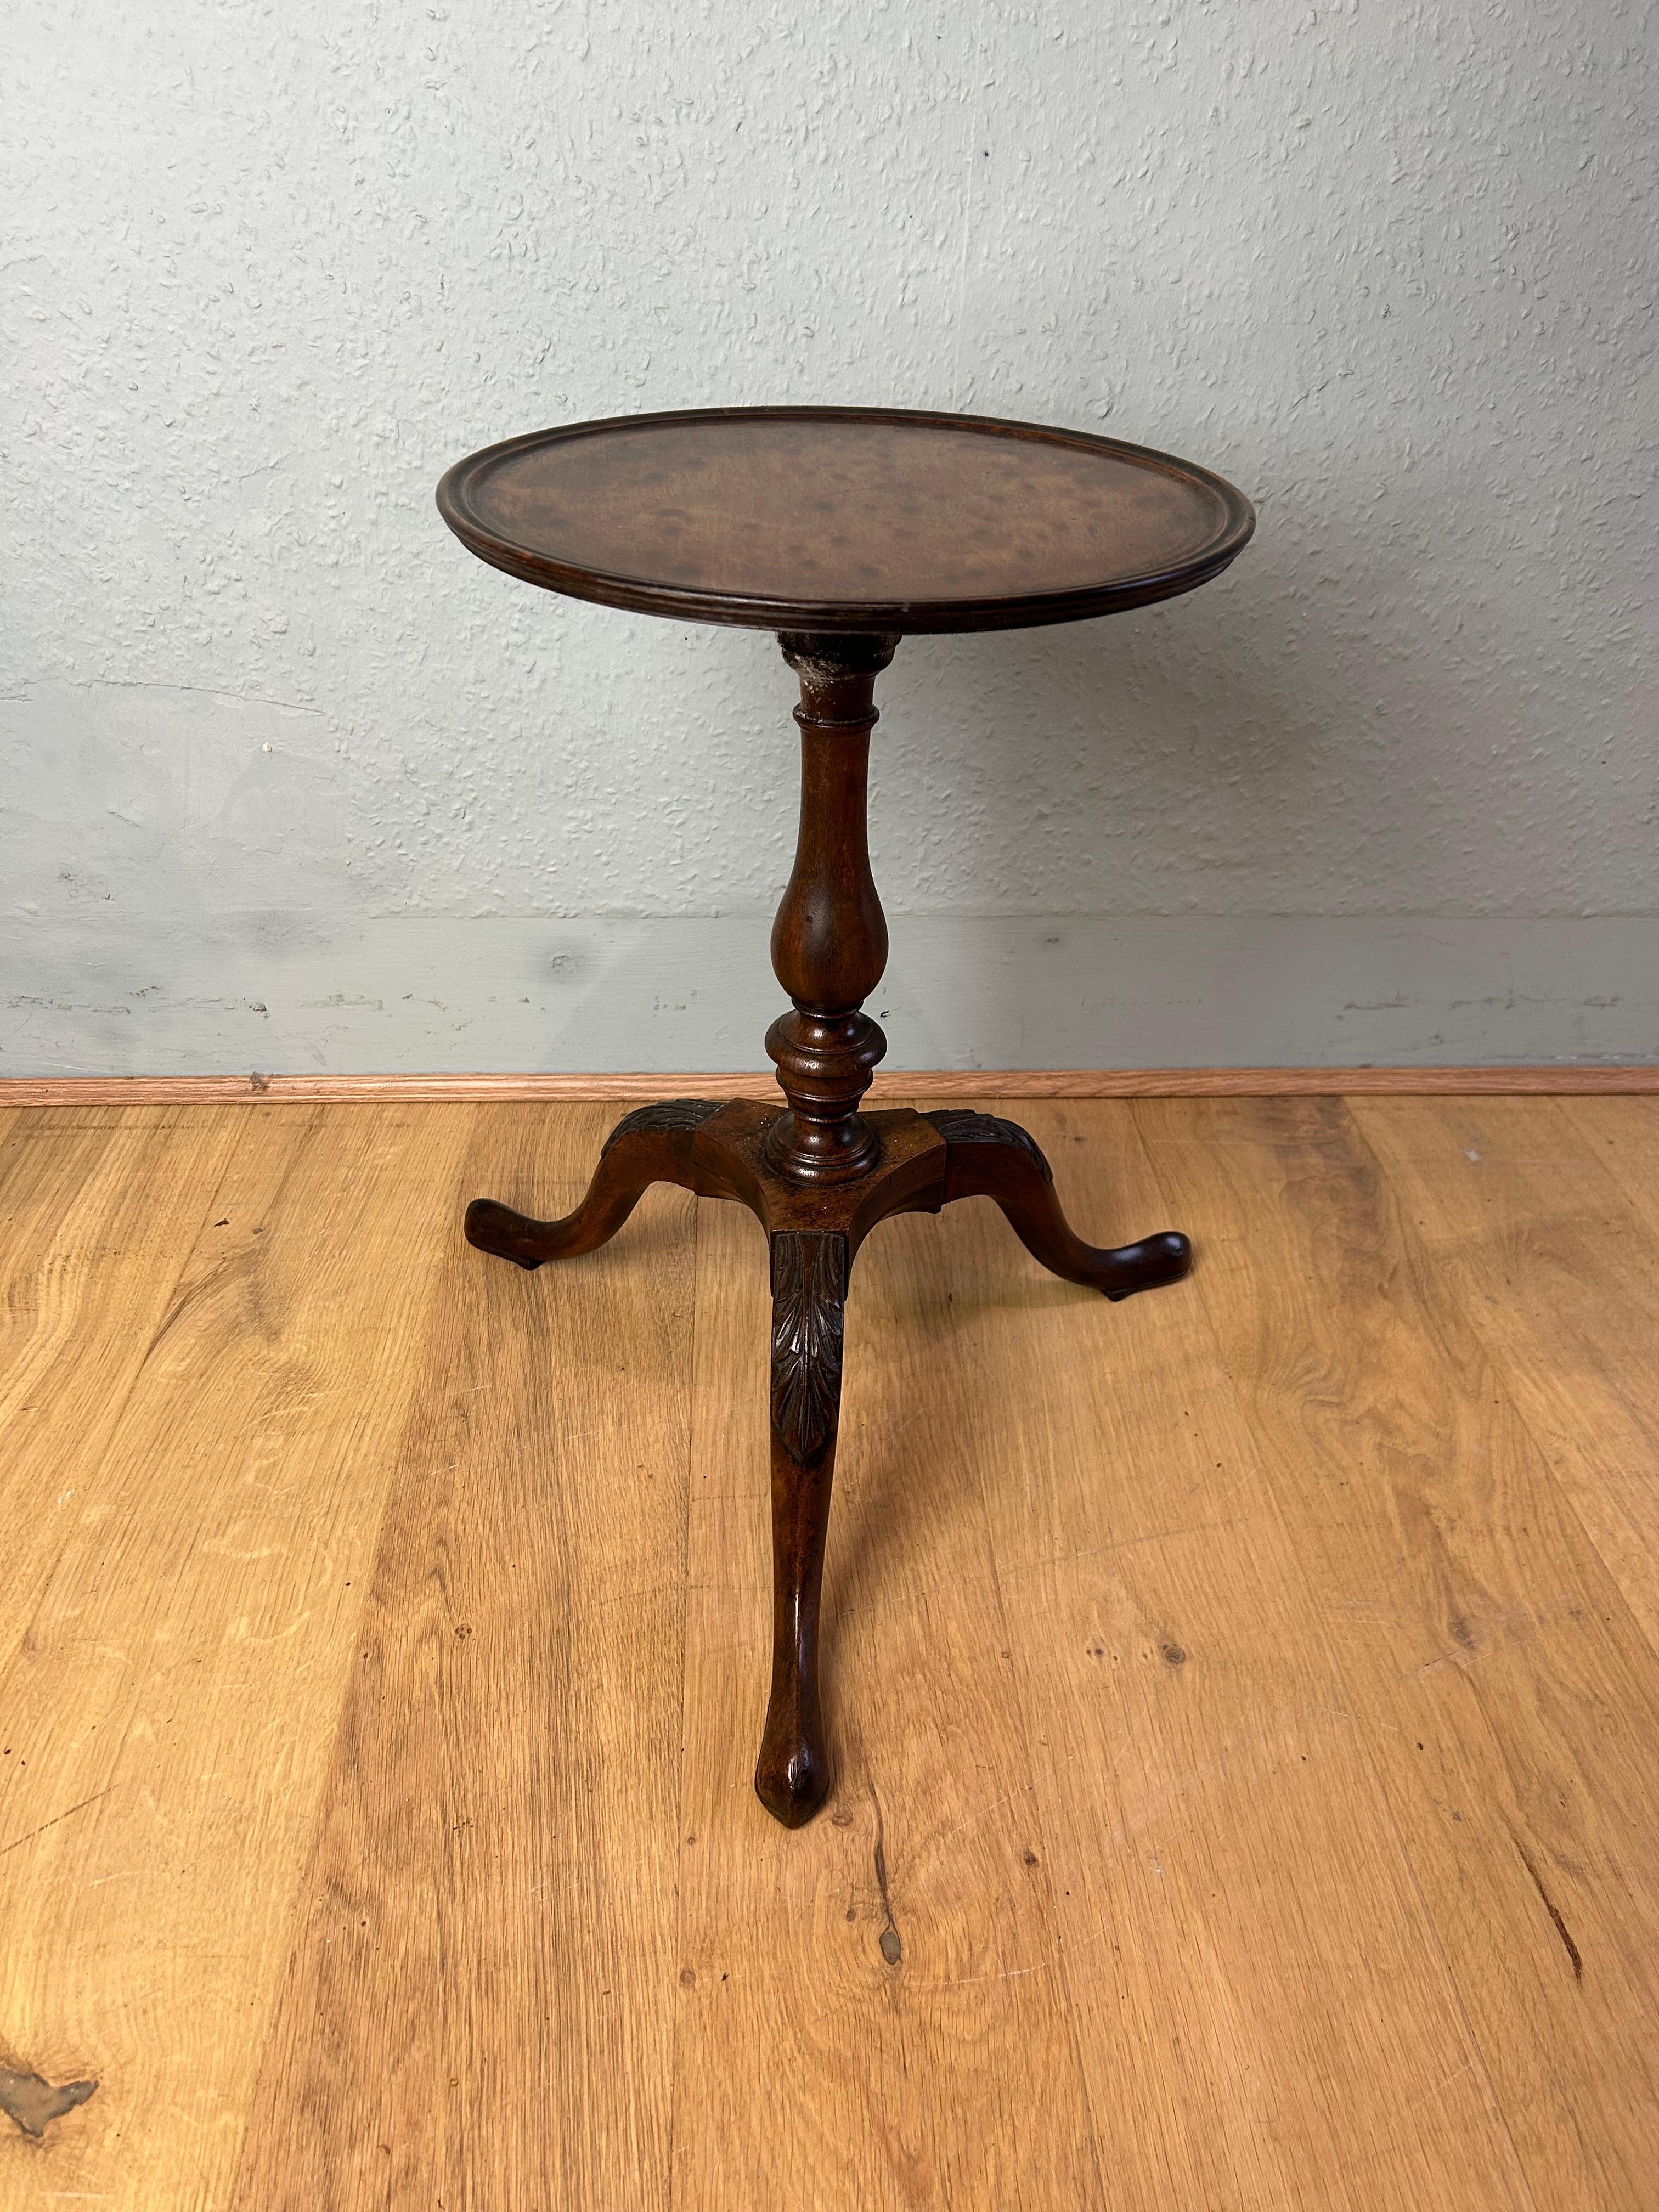 Antique English mahogany kettle stand/wine table circa 1760 with a circular dished plumb pudding mahogany top resting on a fine baluster turned column ending on a elegant cabriole leg with acanthus carving to the high knee.